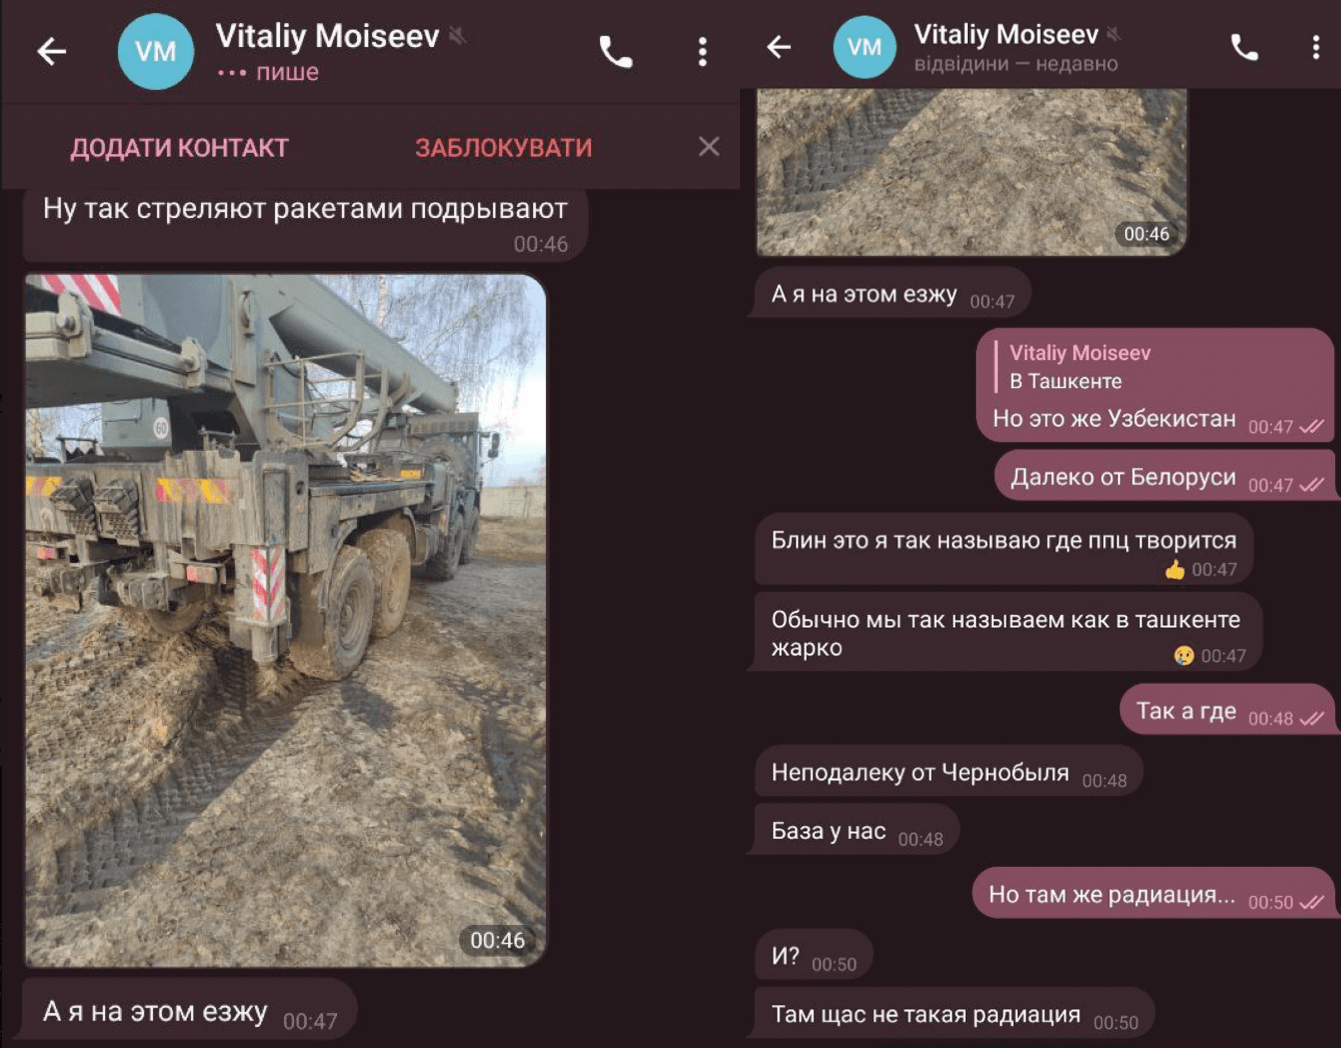 «Best Truck Crane Operator»: Data on a Russian sergeant, who was in the Chernobyl Zone, and now loads equipment in Belarus